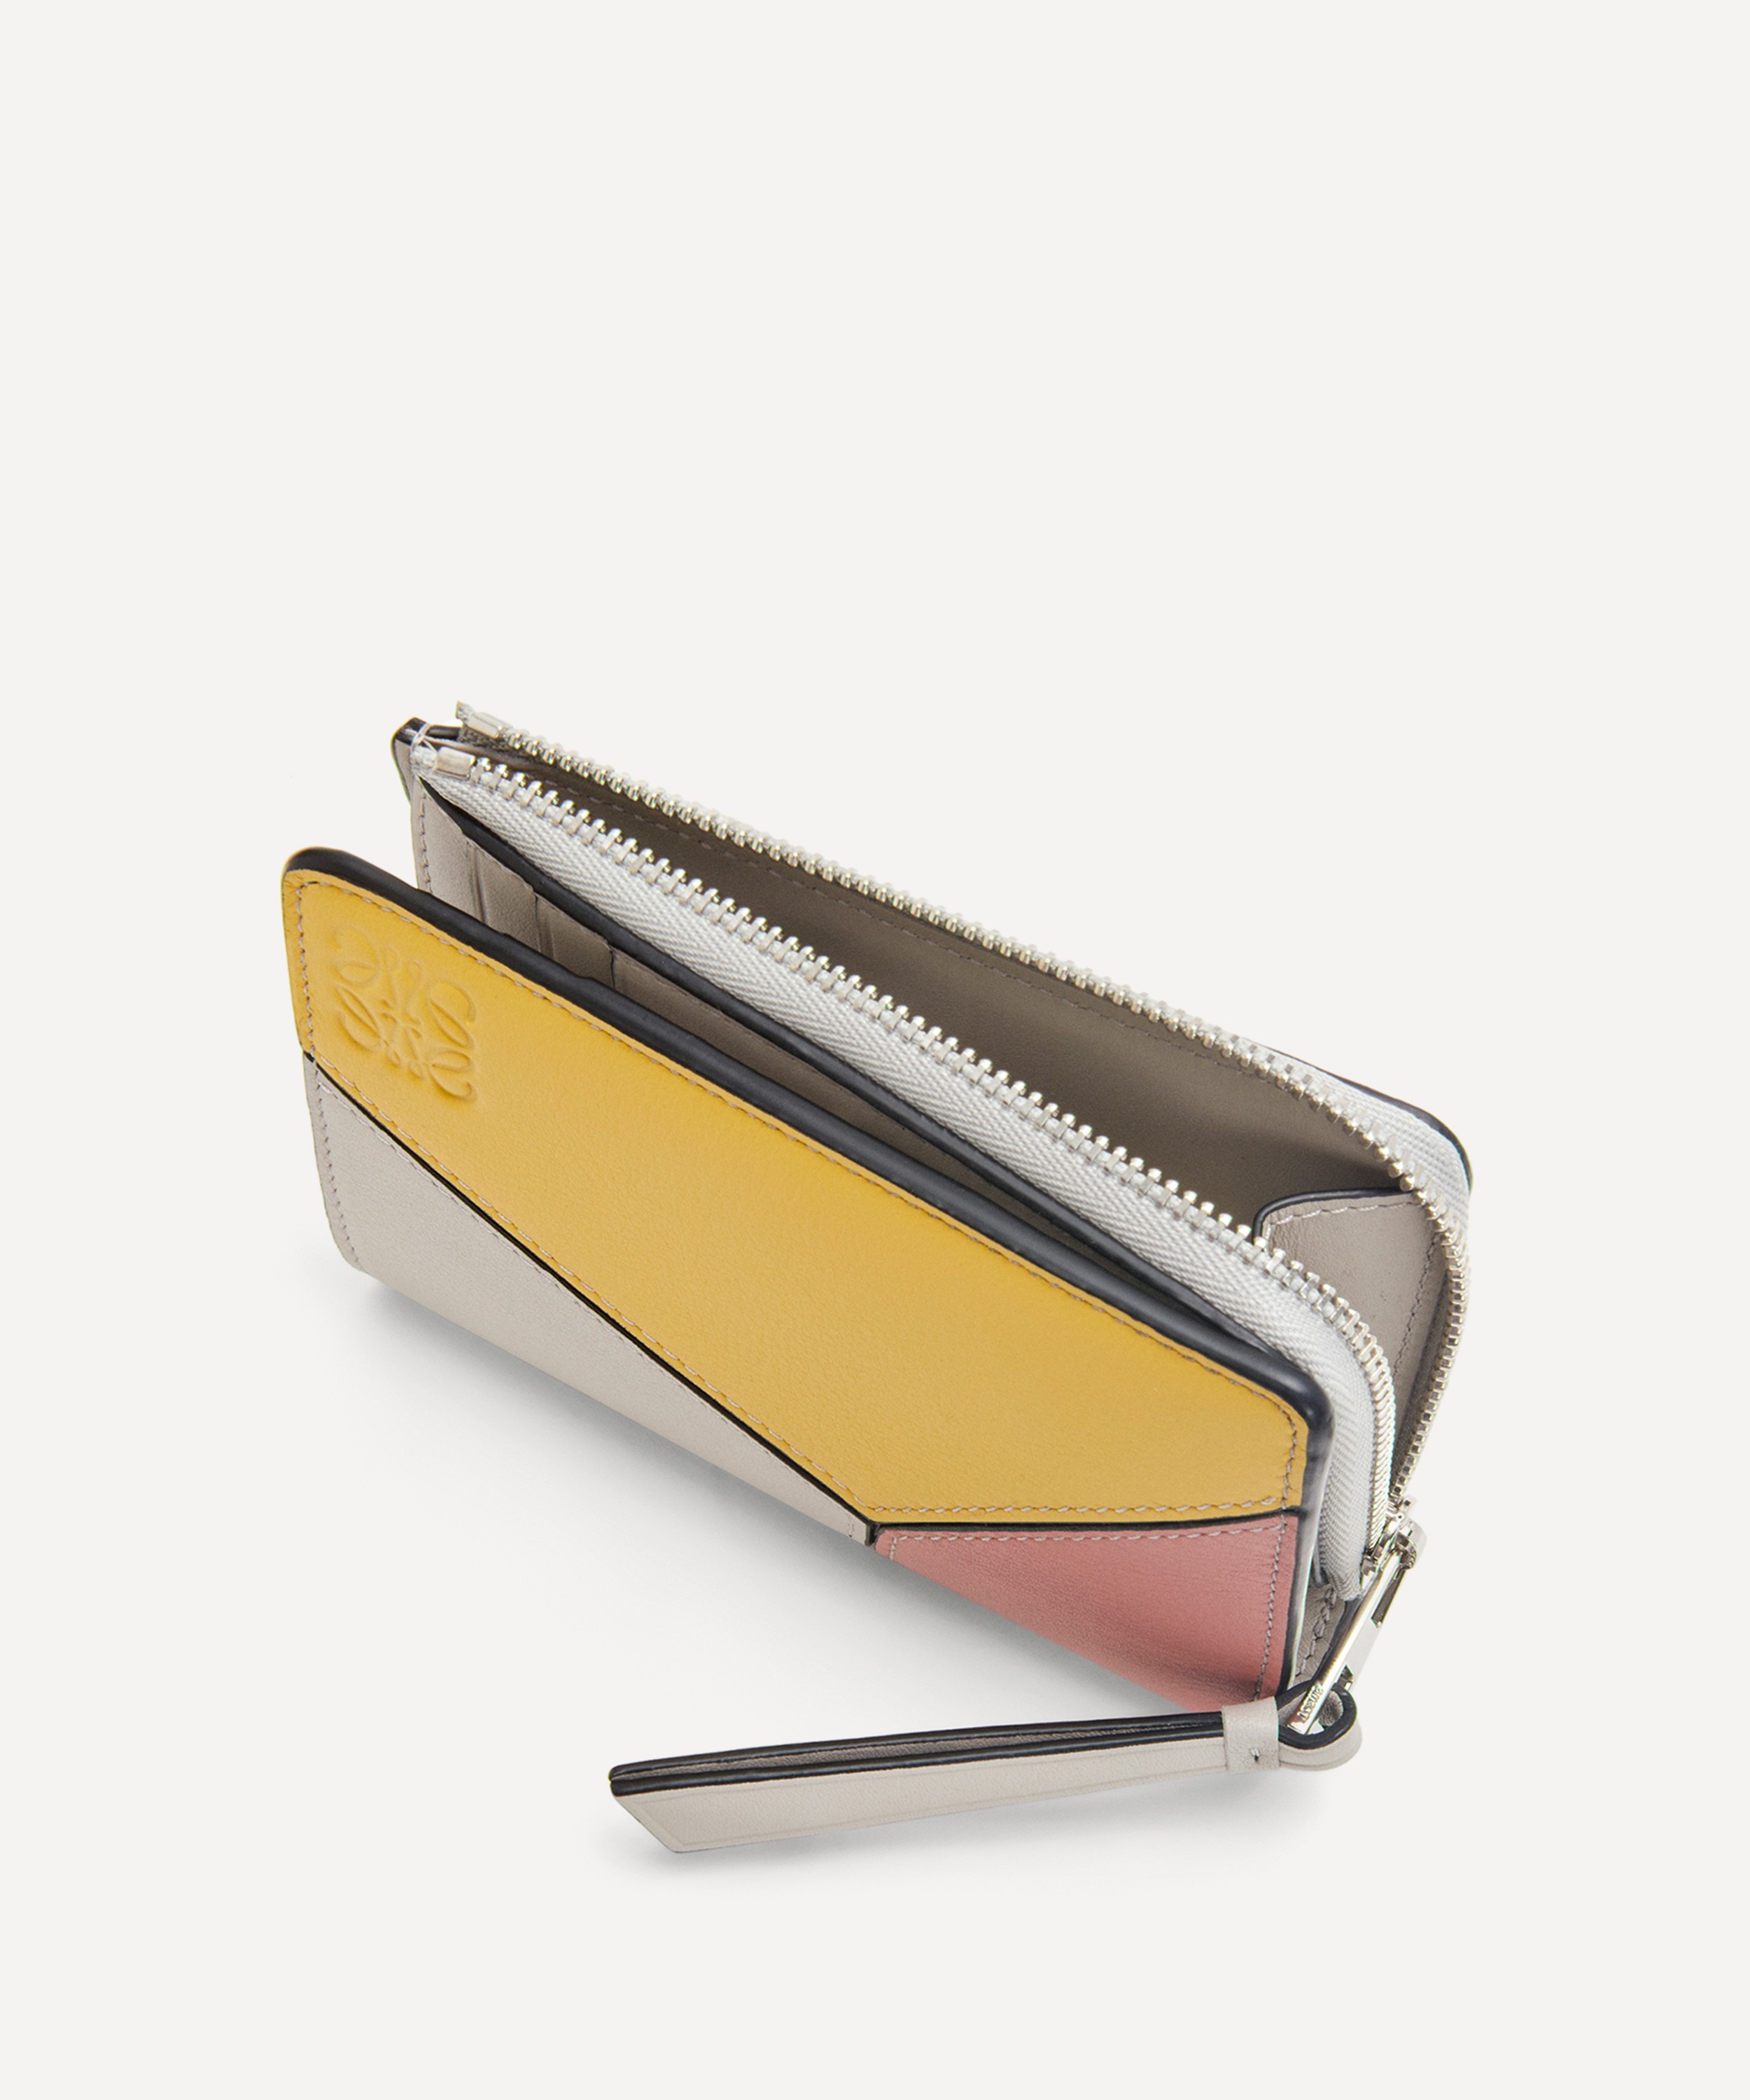 Loewe Leather Puzzle Bifold Wallet